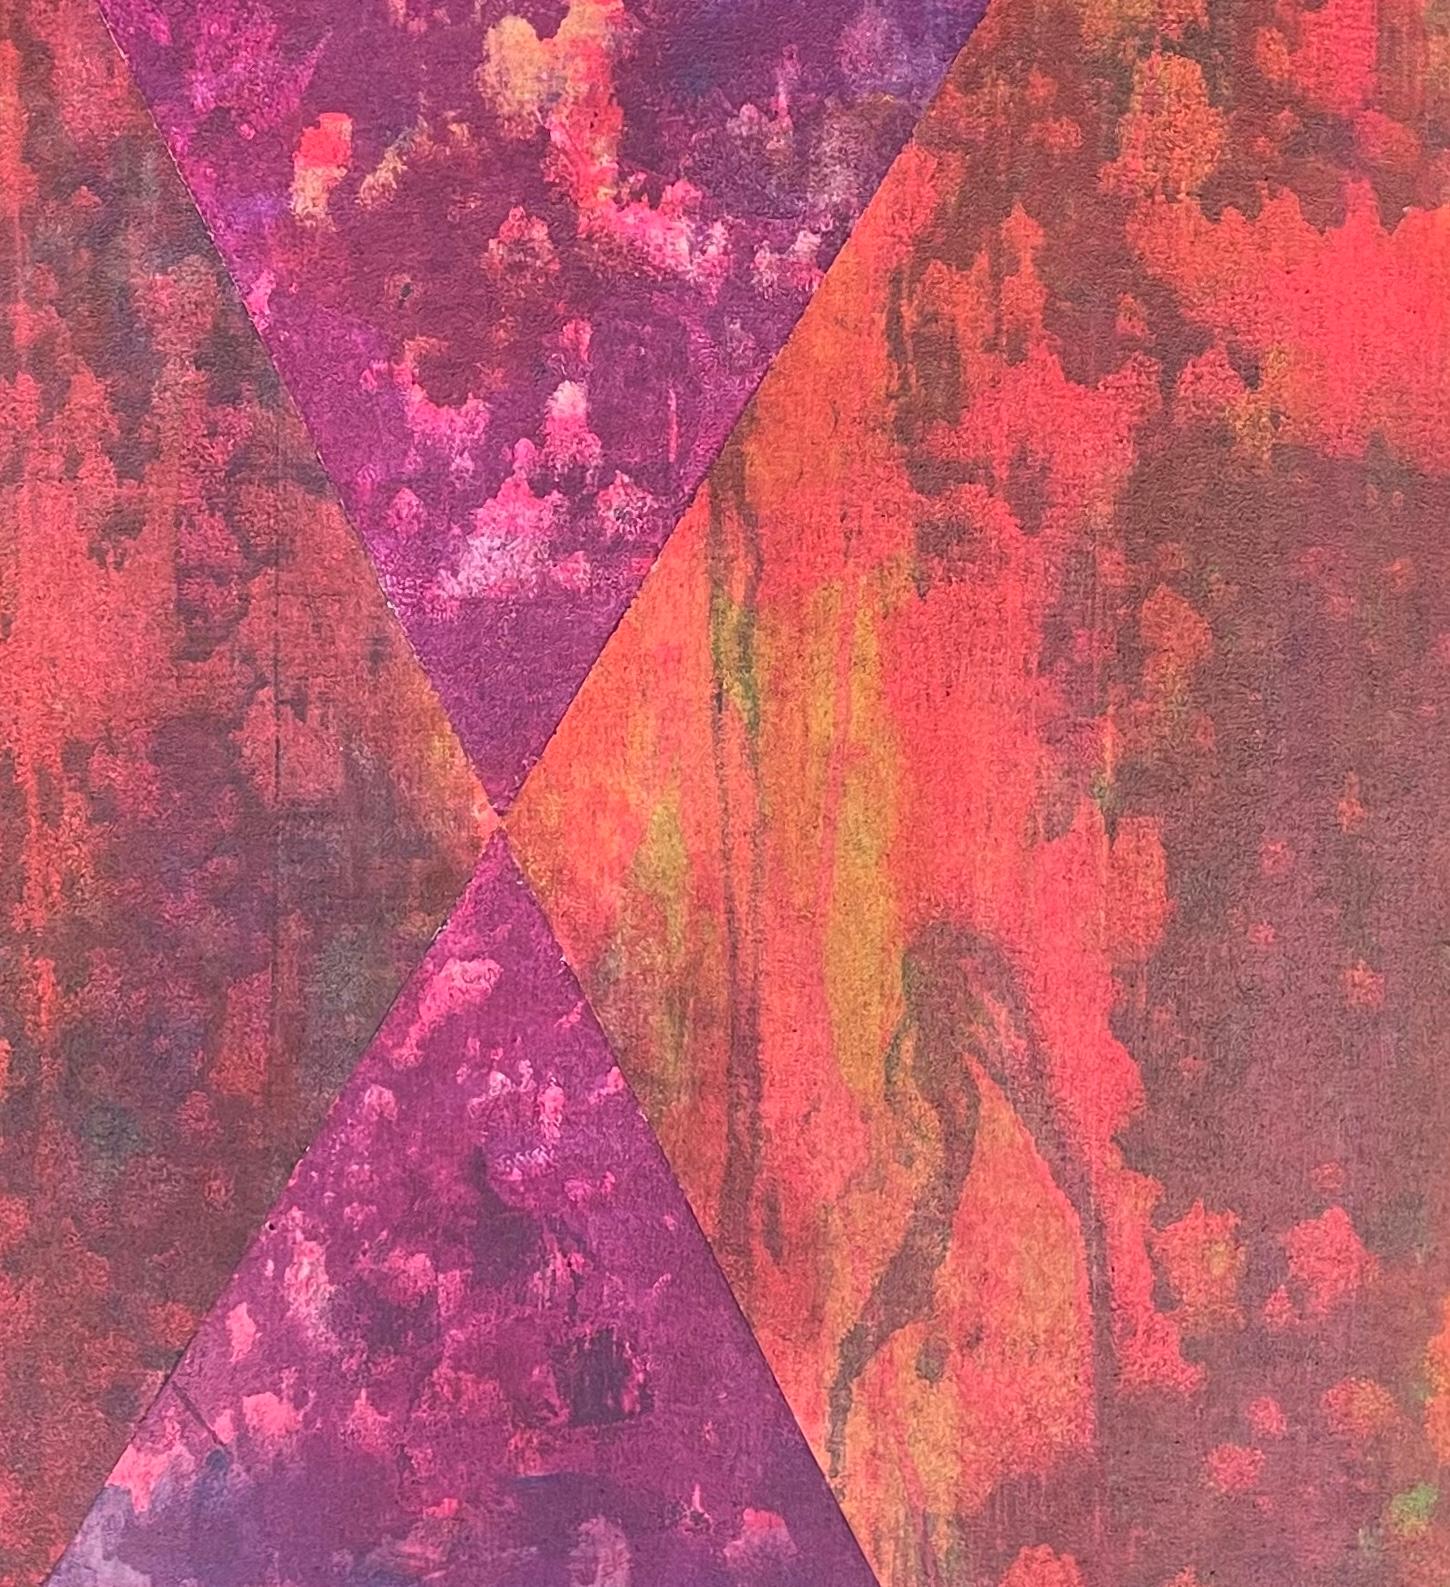 Exodus 12 - African American Artist - colorful abstract red orange purple pink - Painting by G. Caliman Coxe